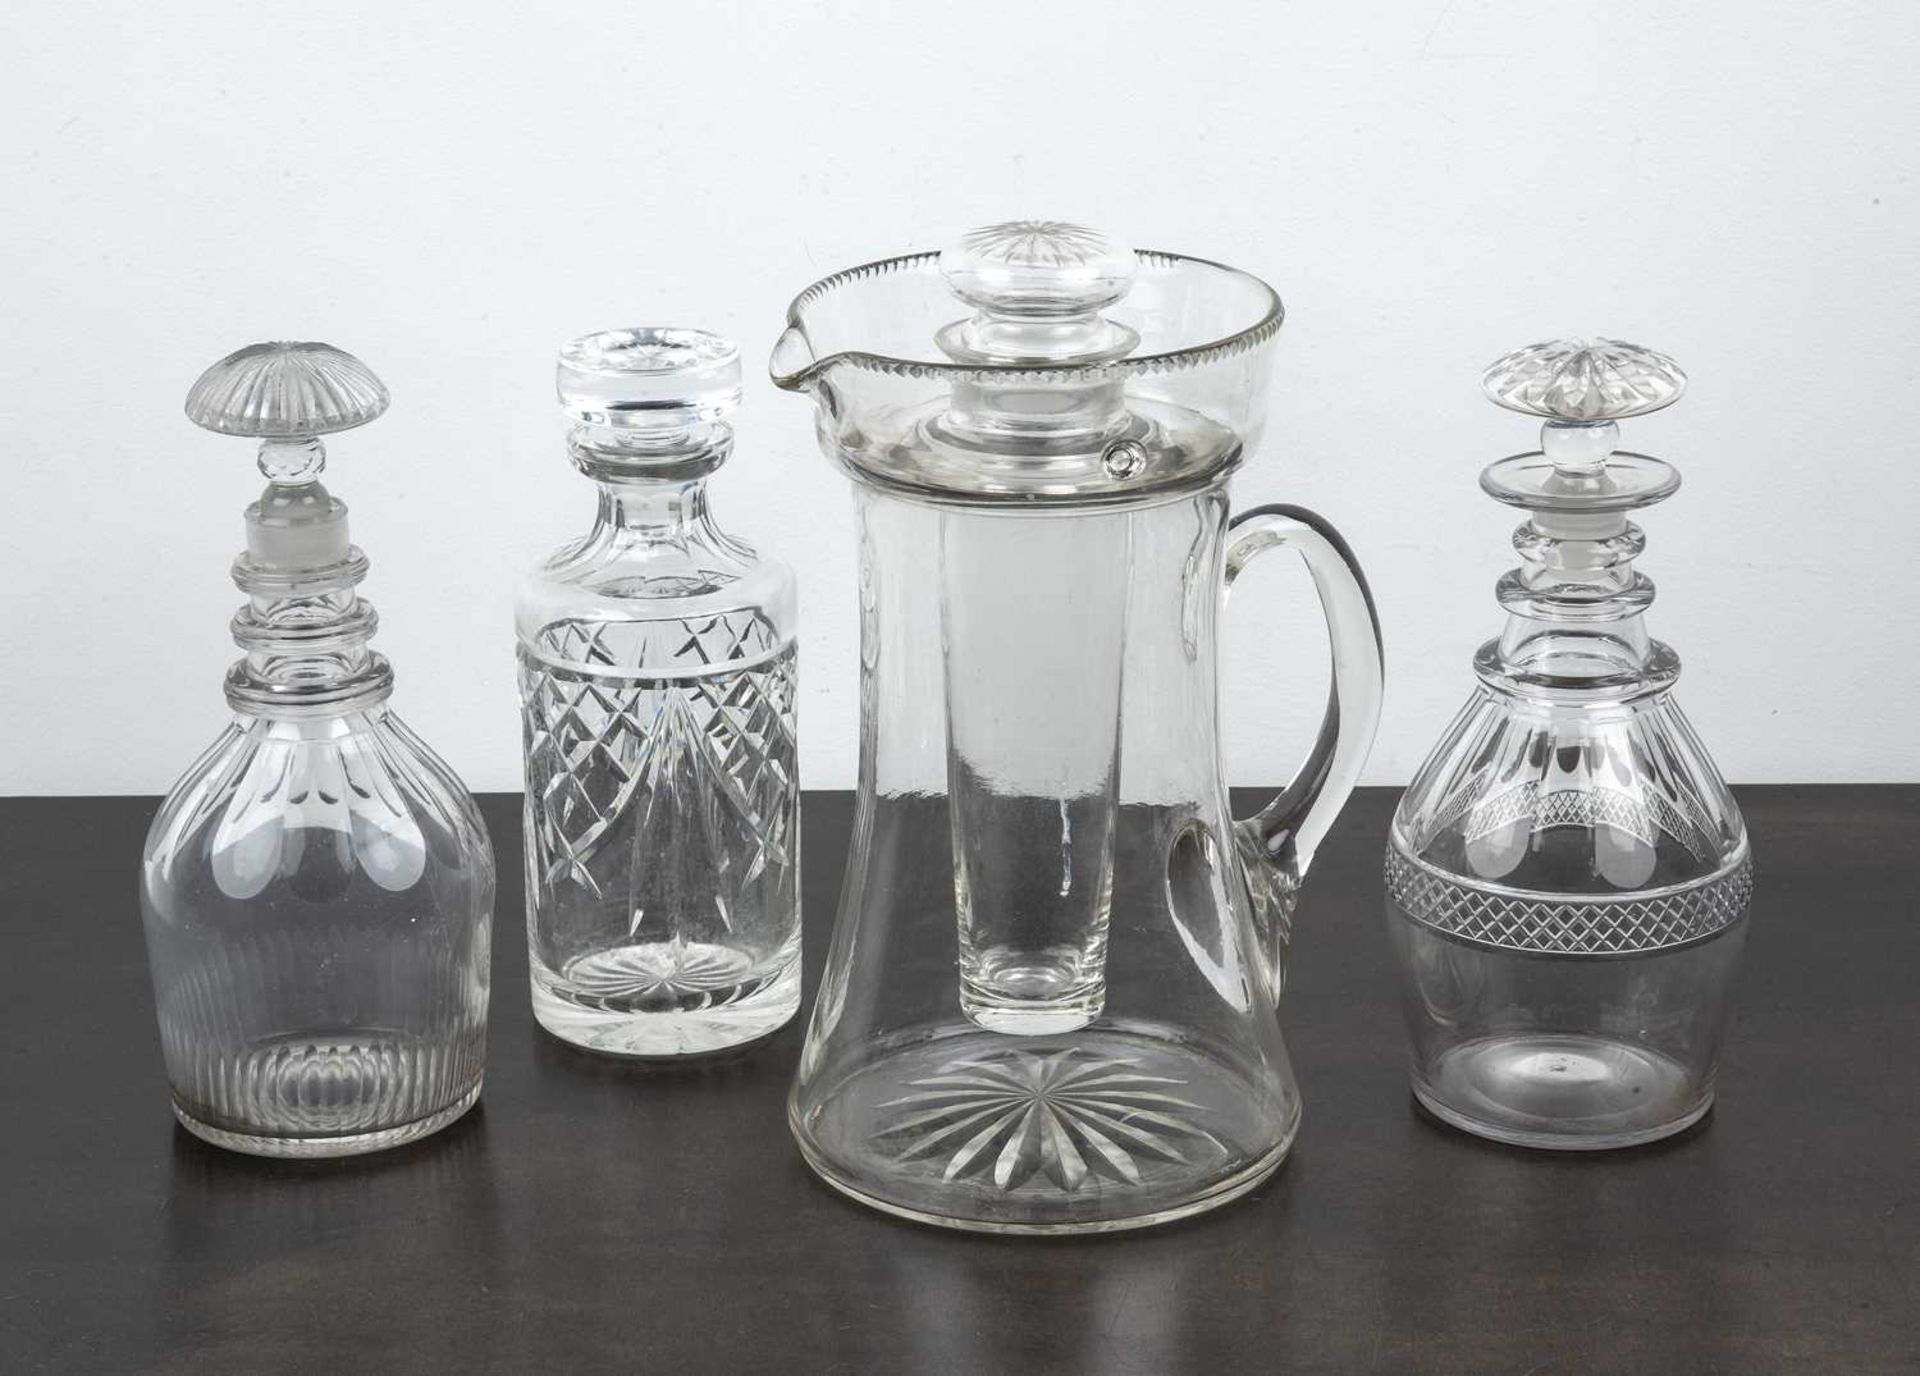 Collection of decanters including three decanters with lids and cut decoration, and a large glass